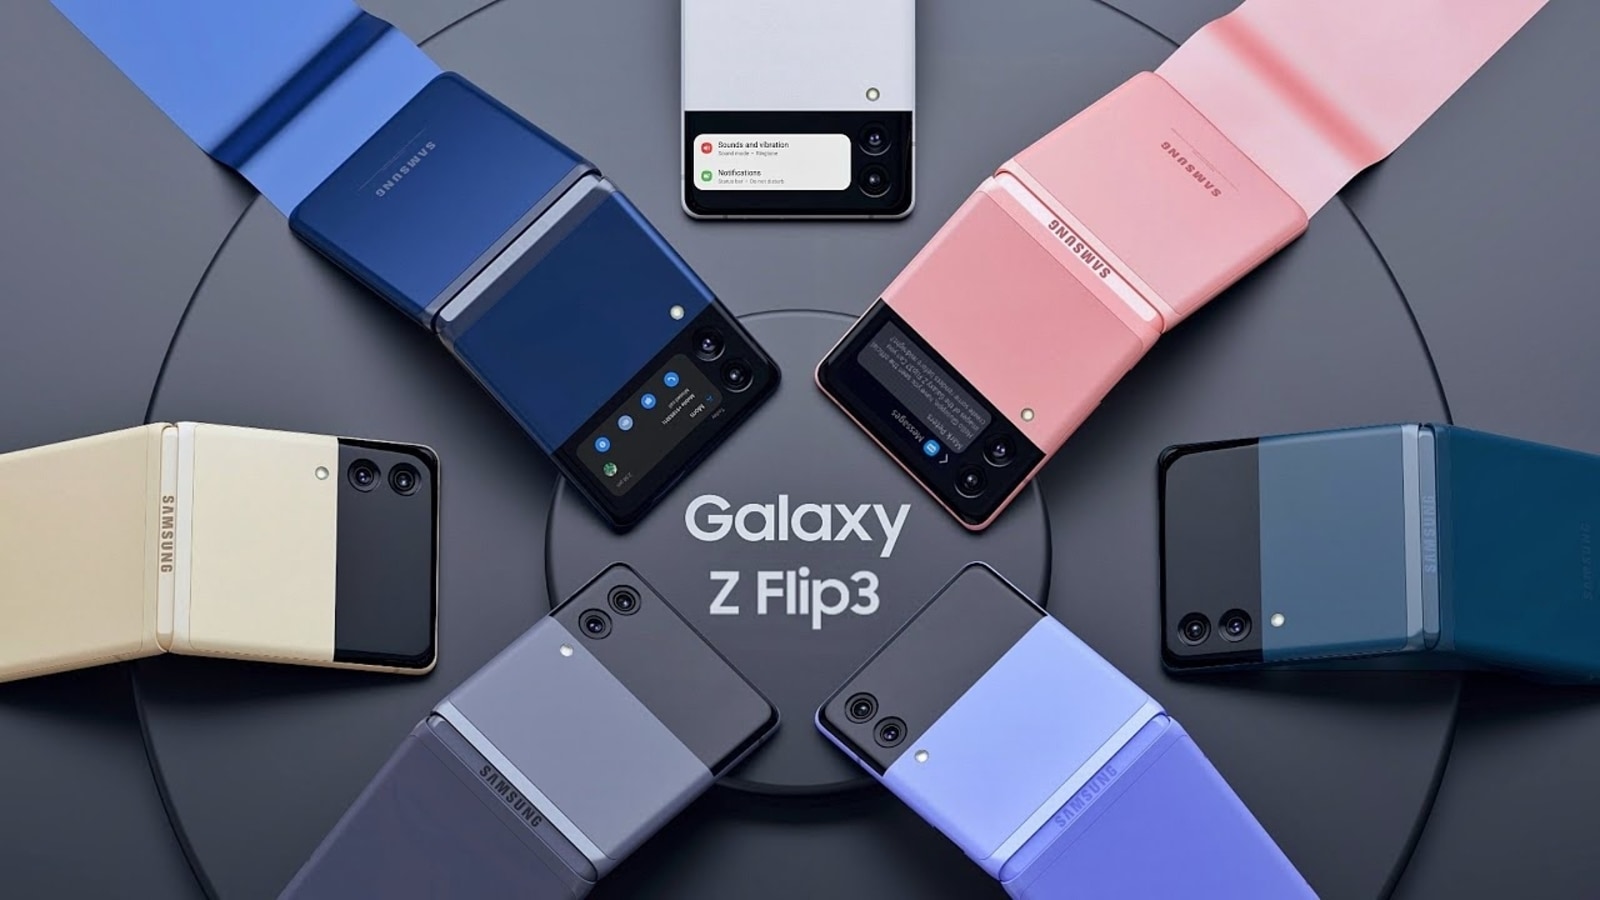 Samsung Galaxy Z Flip 3 renders show off three colours we haven’t seen